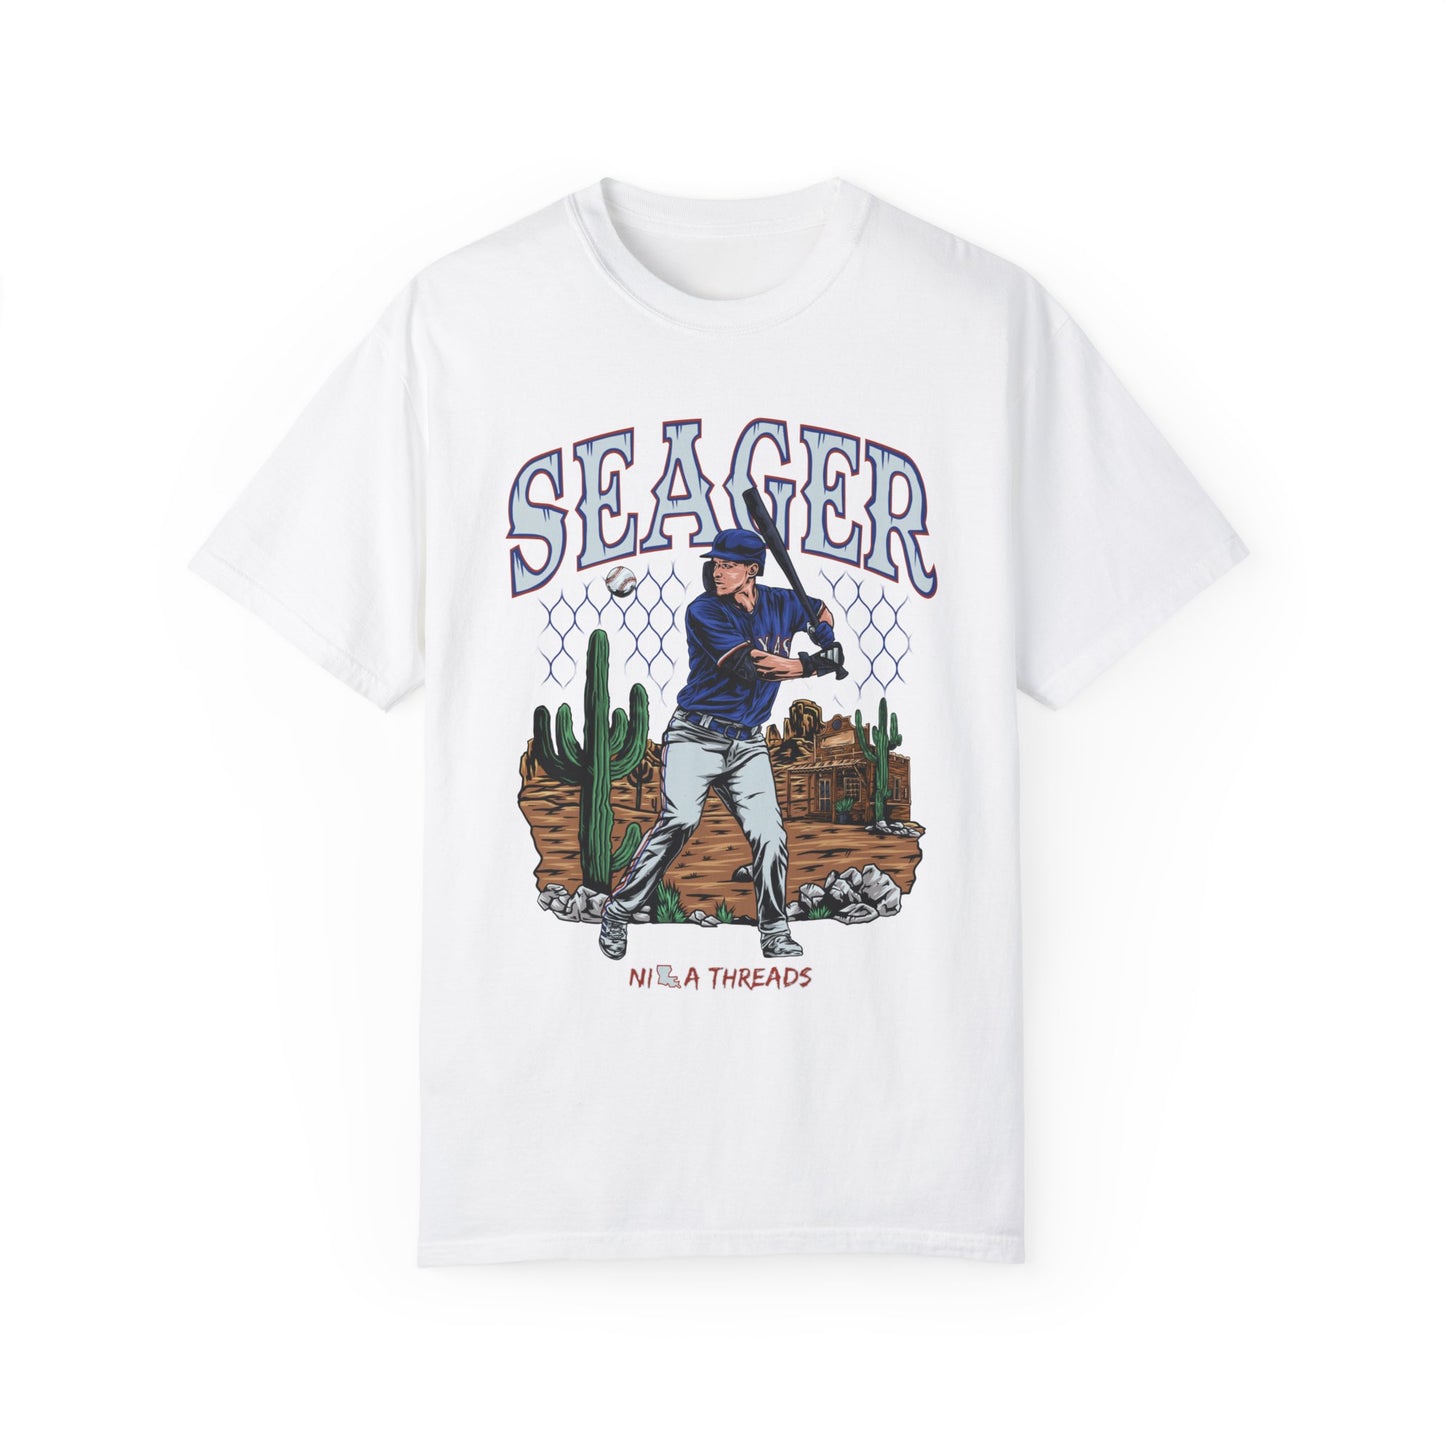 Corey Seager Illustration Graphic Shirt (Western Graphic)